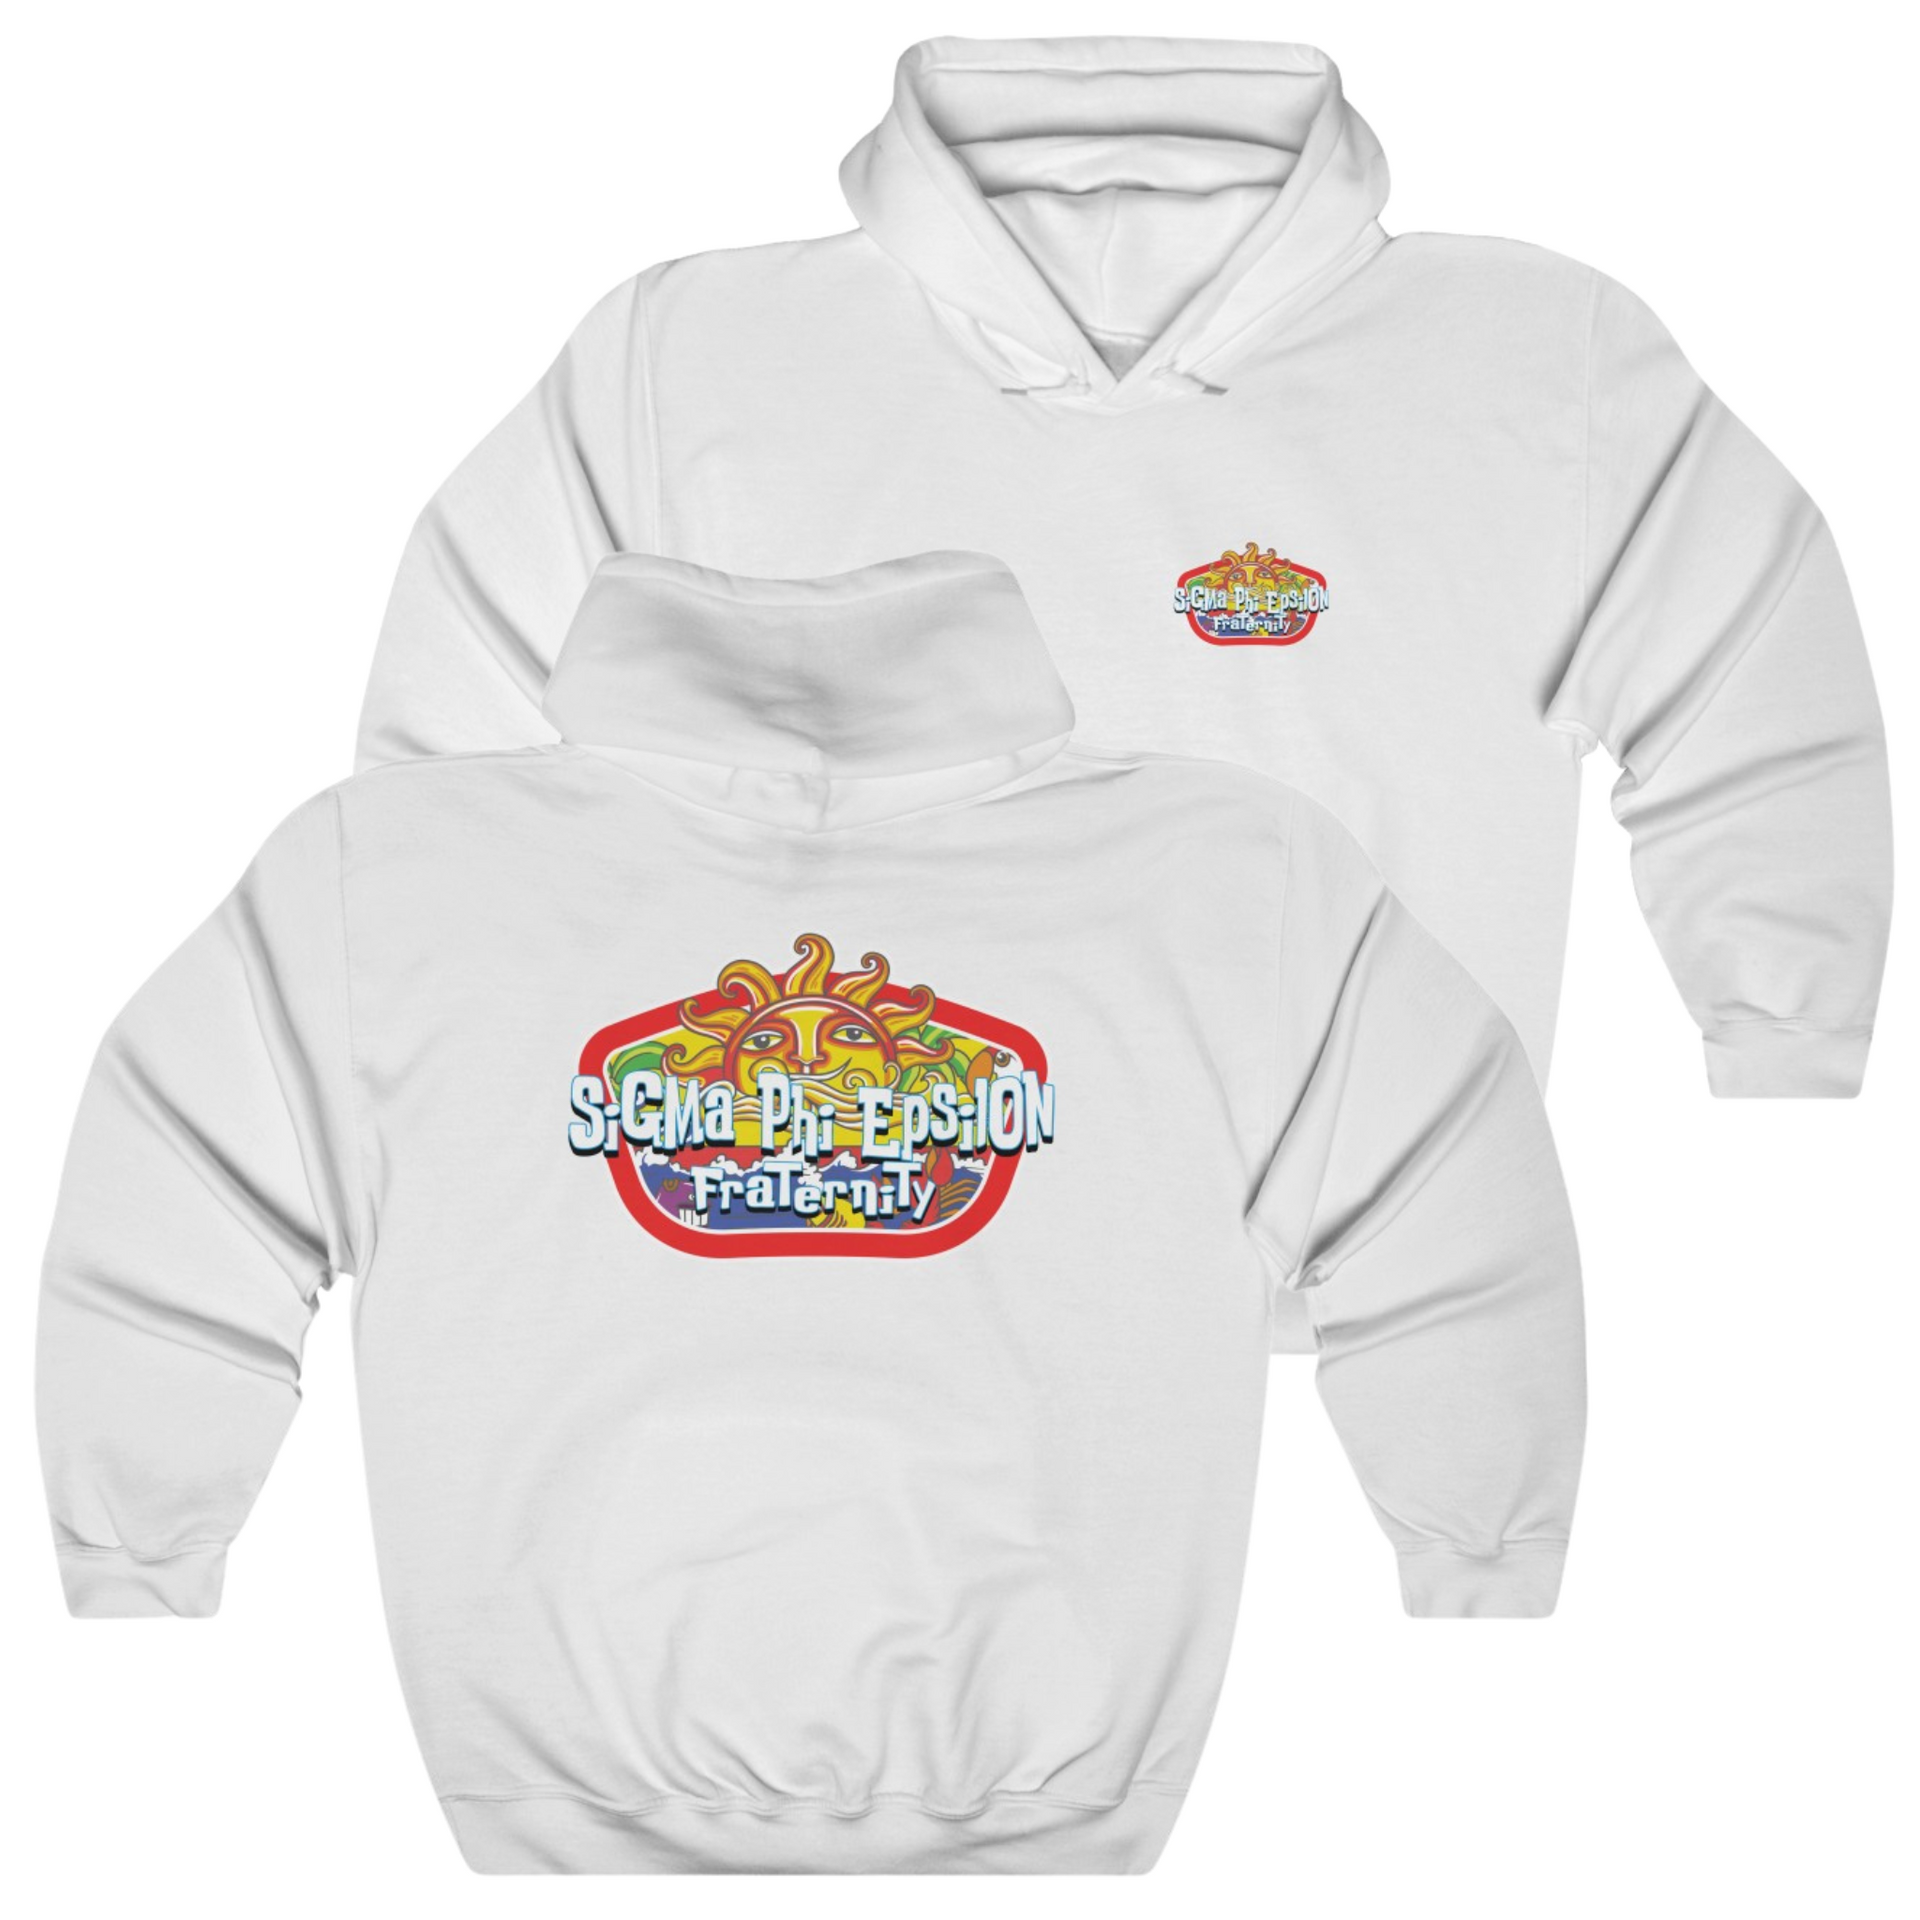 White Sigma Phi Epsilon Graphic Hoodie | Summer Sol | SigEp Fraternity Clothes and Merchandise